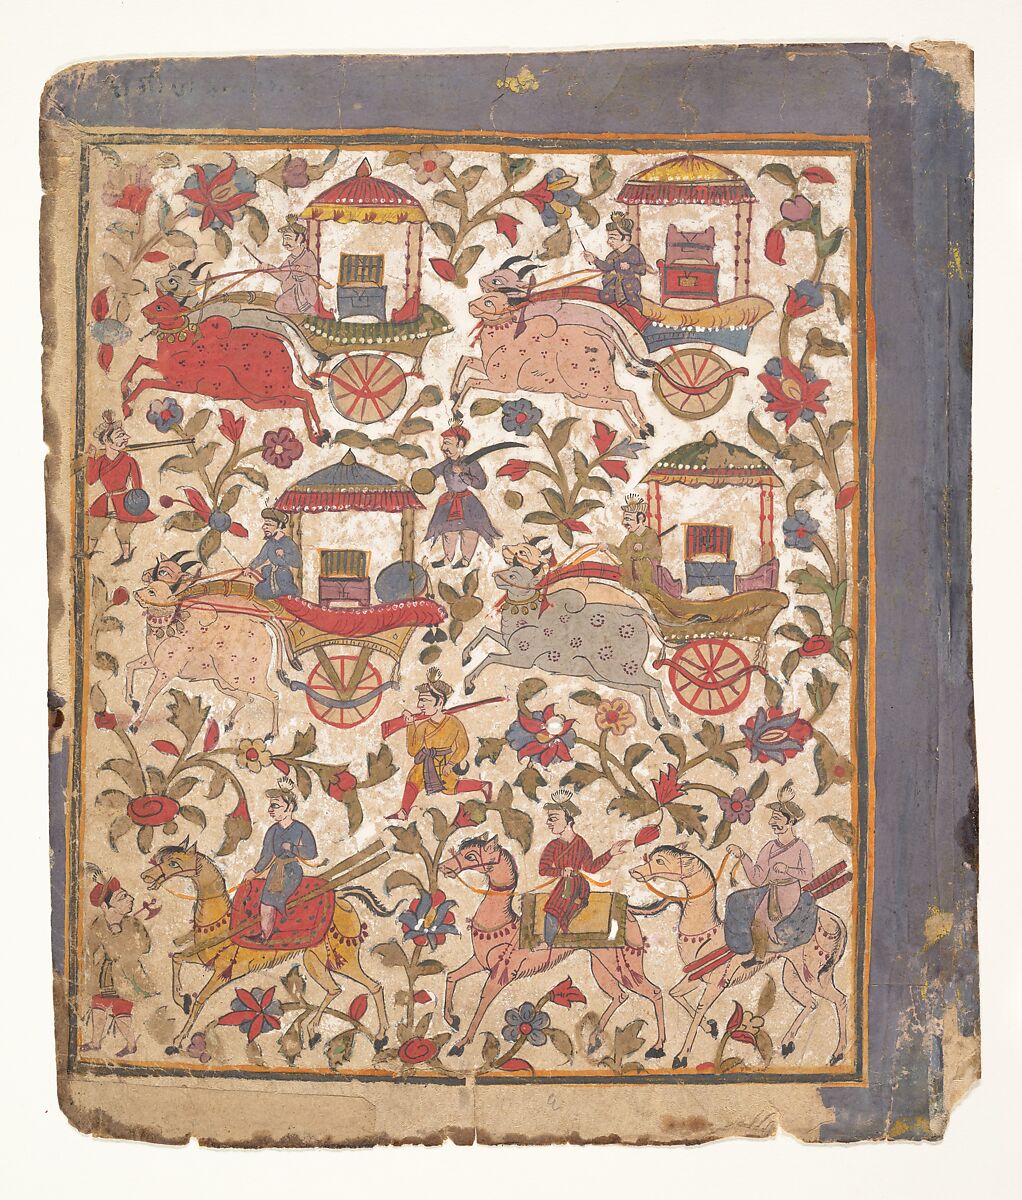 Procession of Carriages Carrying Booty: Page from a Dispersed Bhagavata Purana Manuscript, Ink and opaque watercolor on paper, India (Gujarat) 